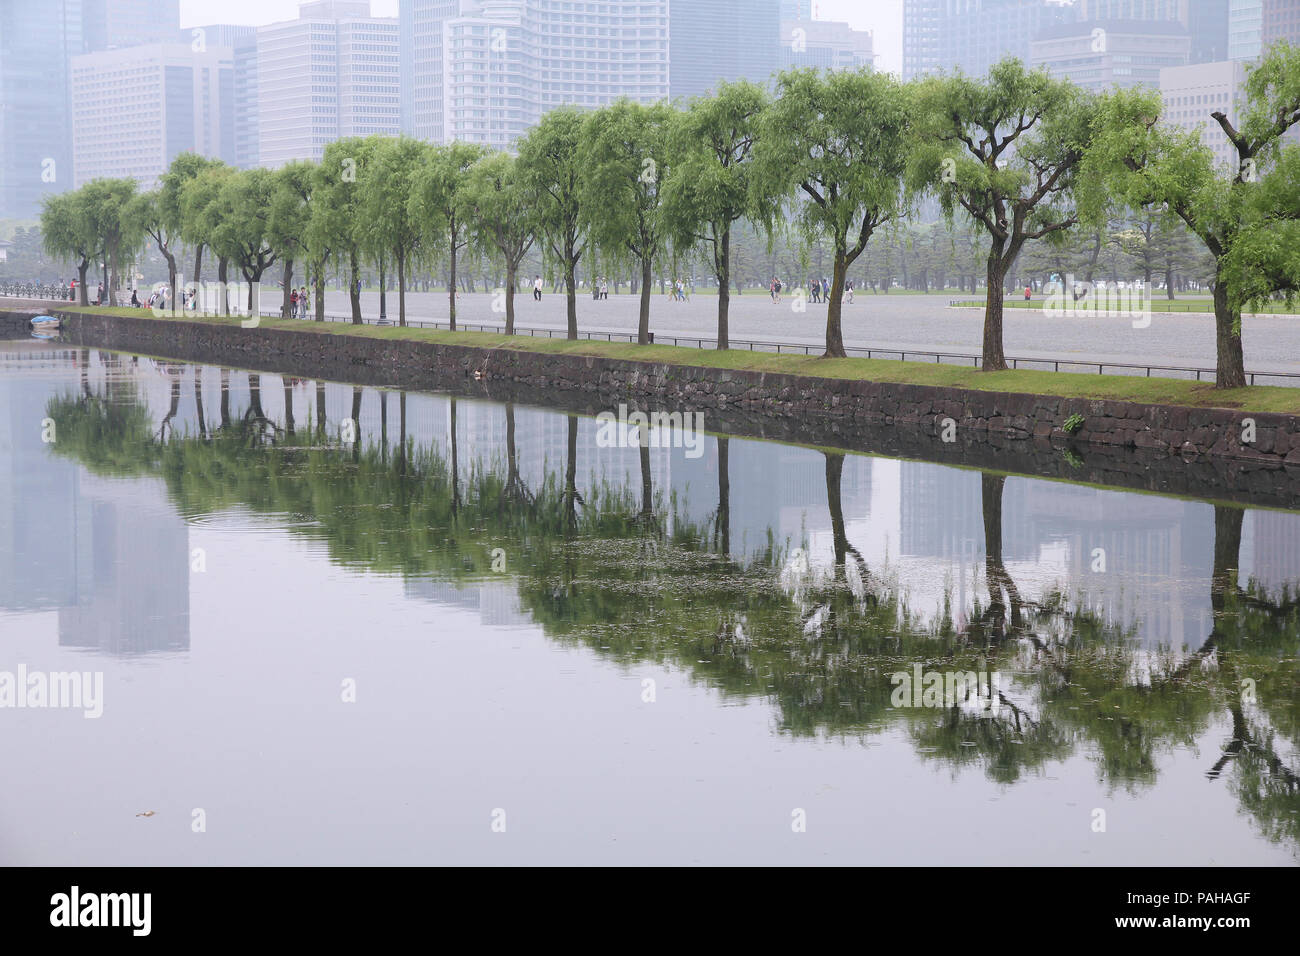 Tokyo, Japan - Imperial Palace gardens and the urban pollution smog. Stock Photo